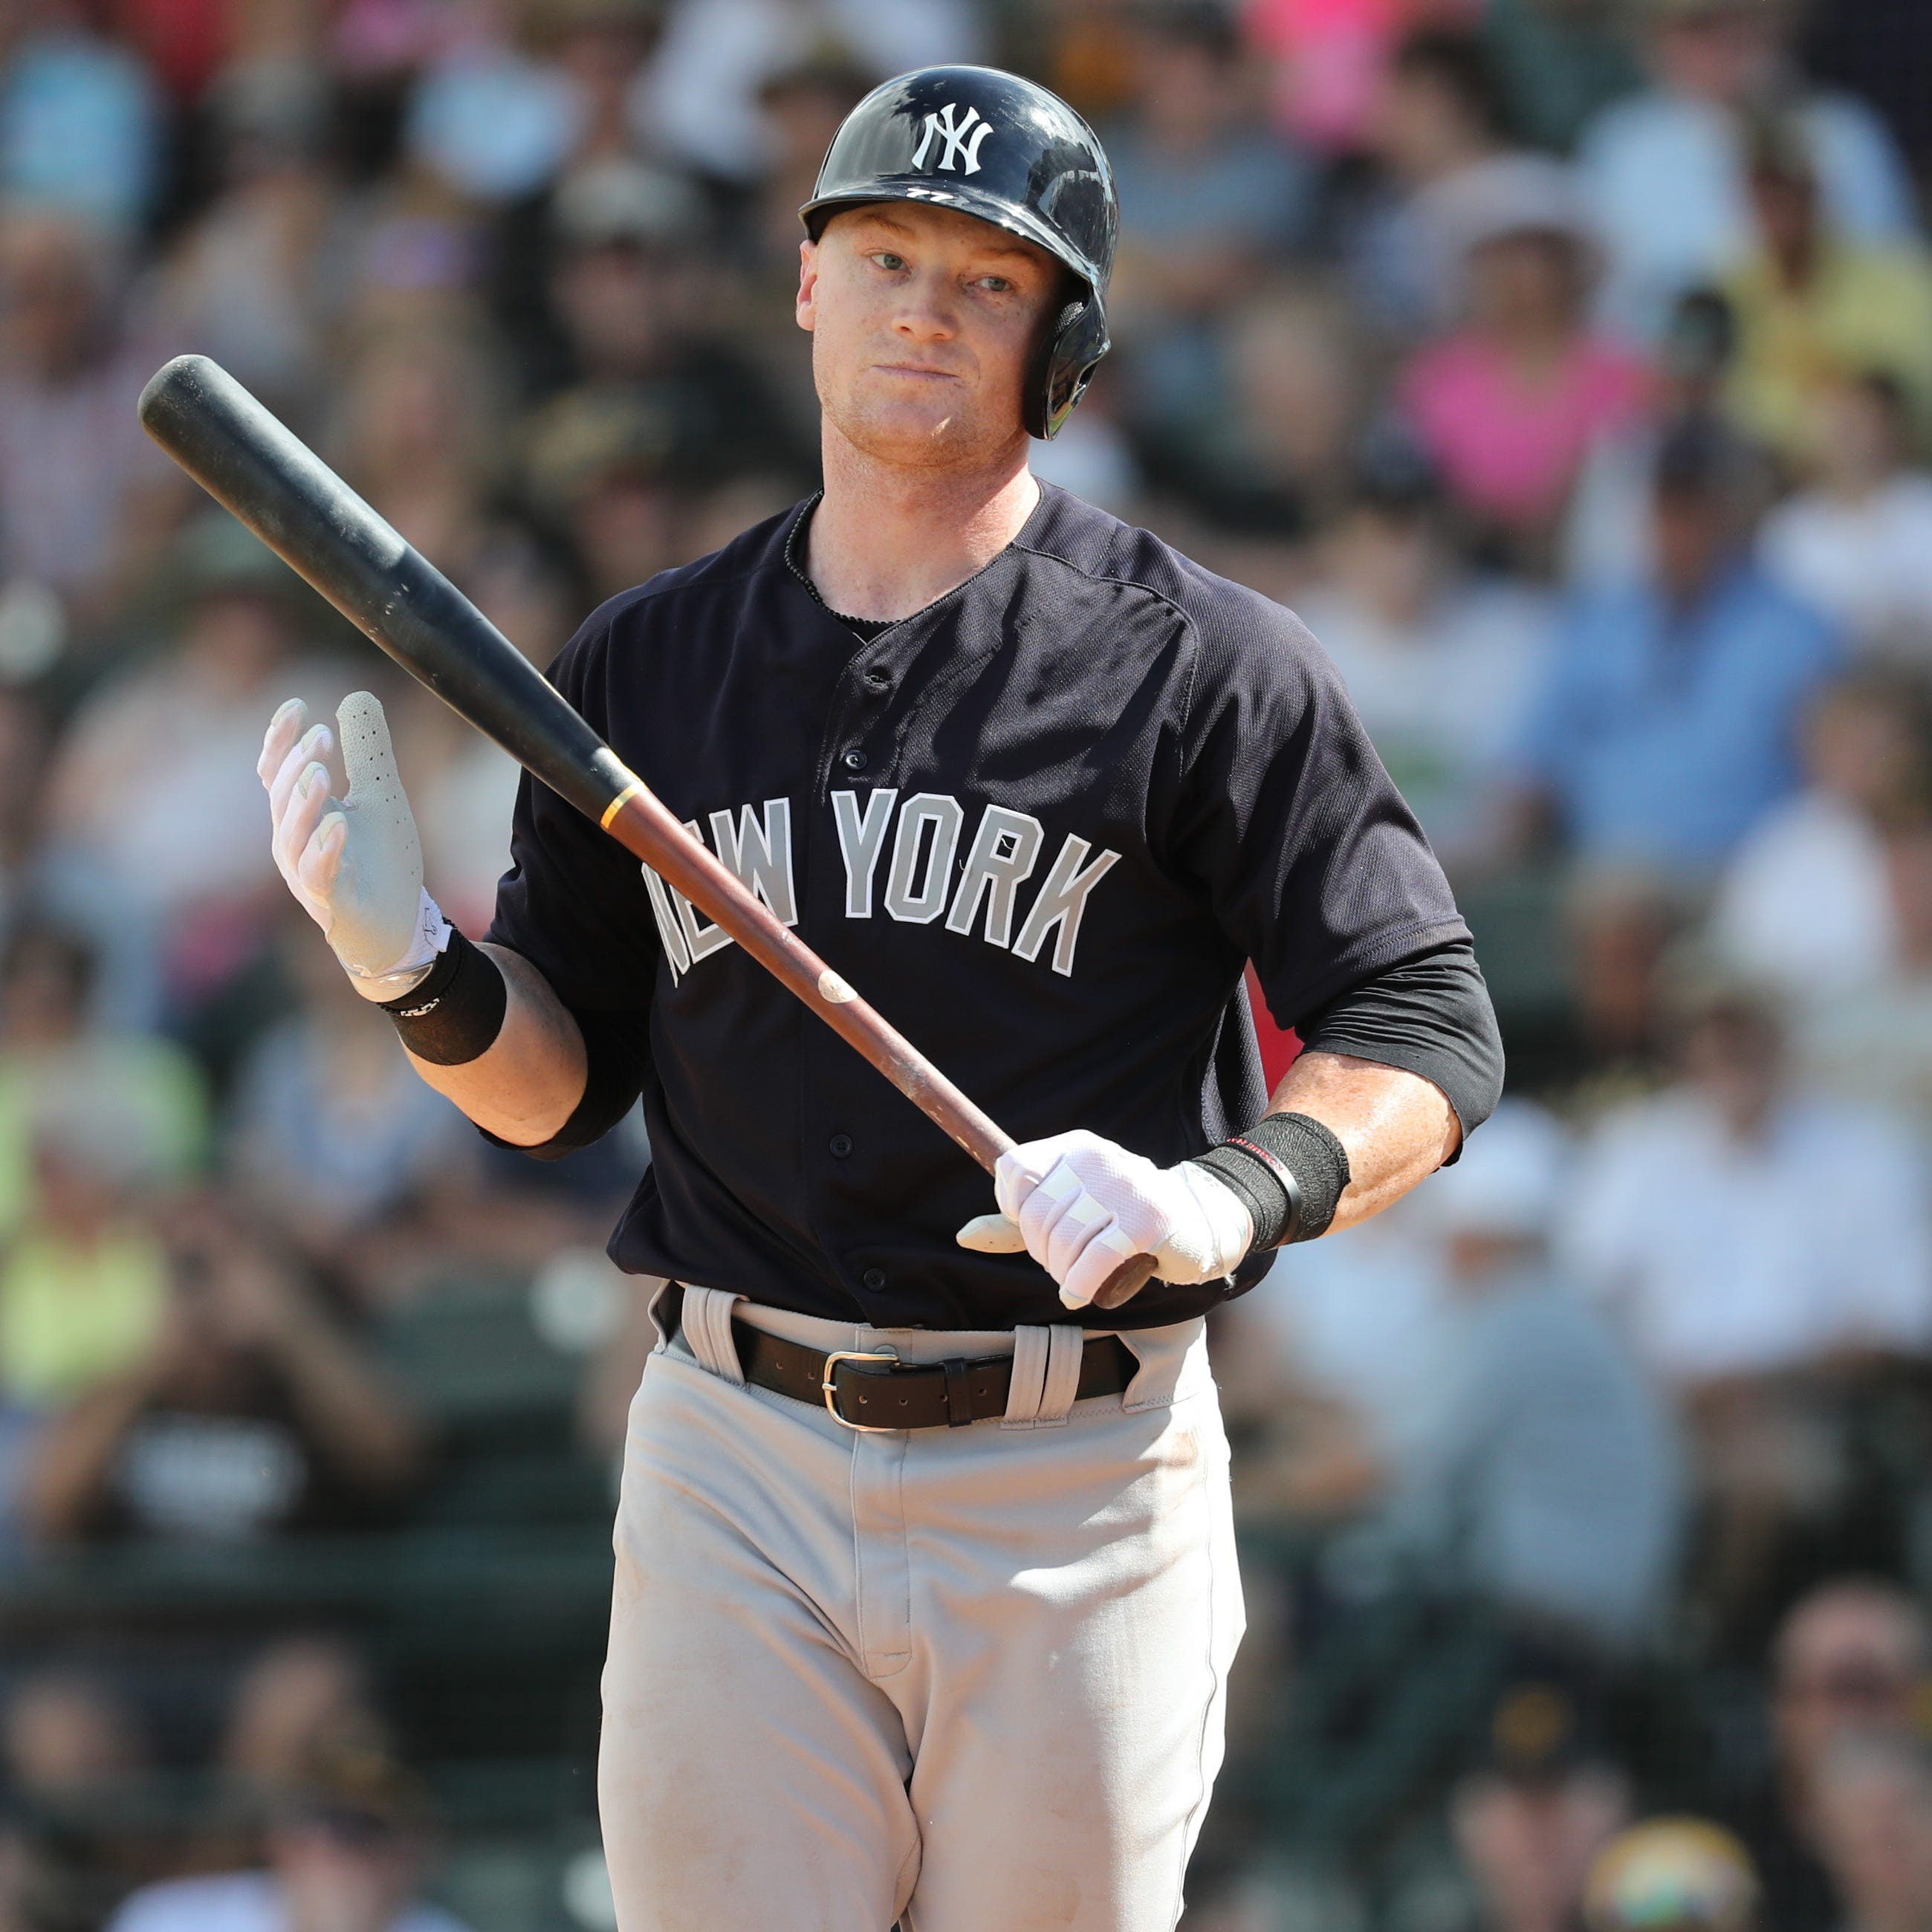 New York Yankees outfielder Clint Frazier during a spring training game in February.